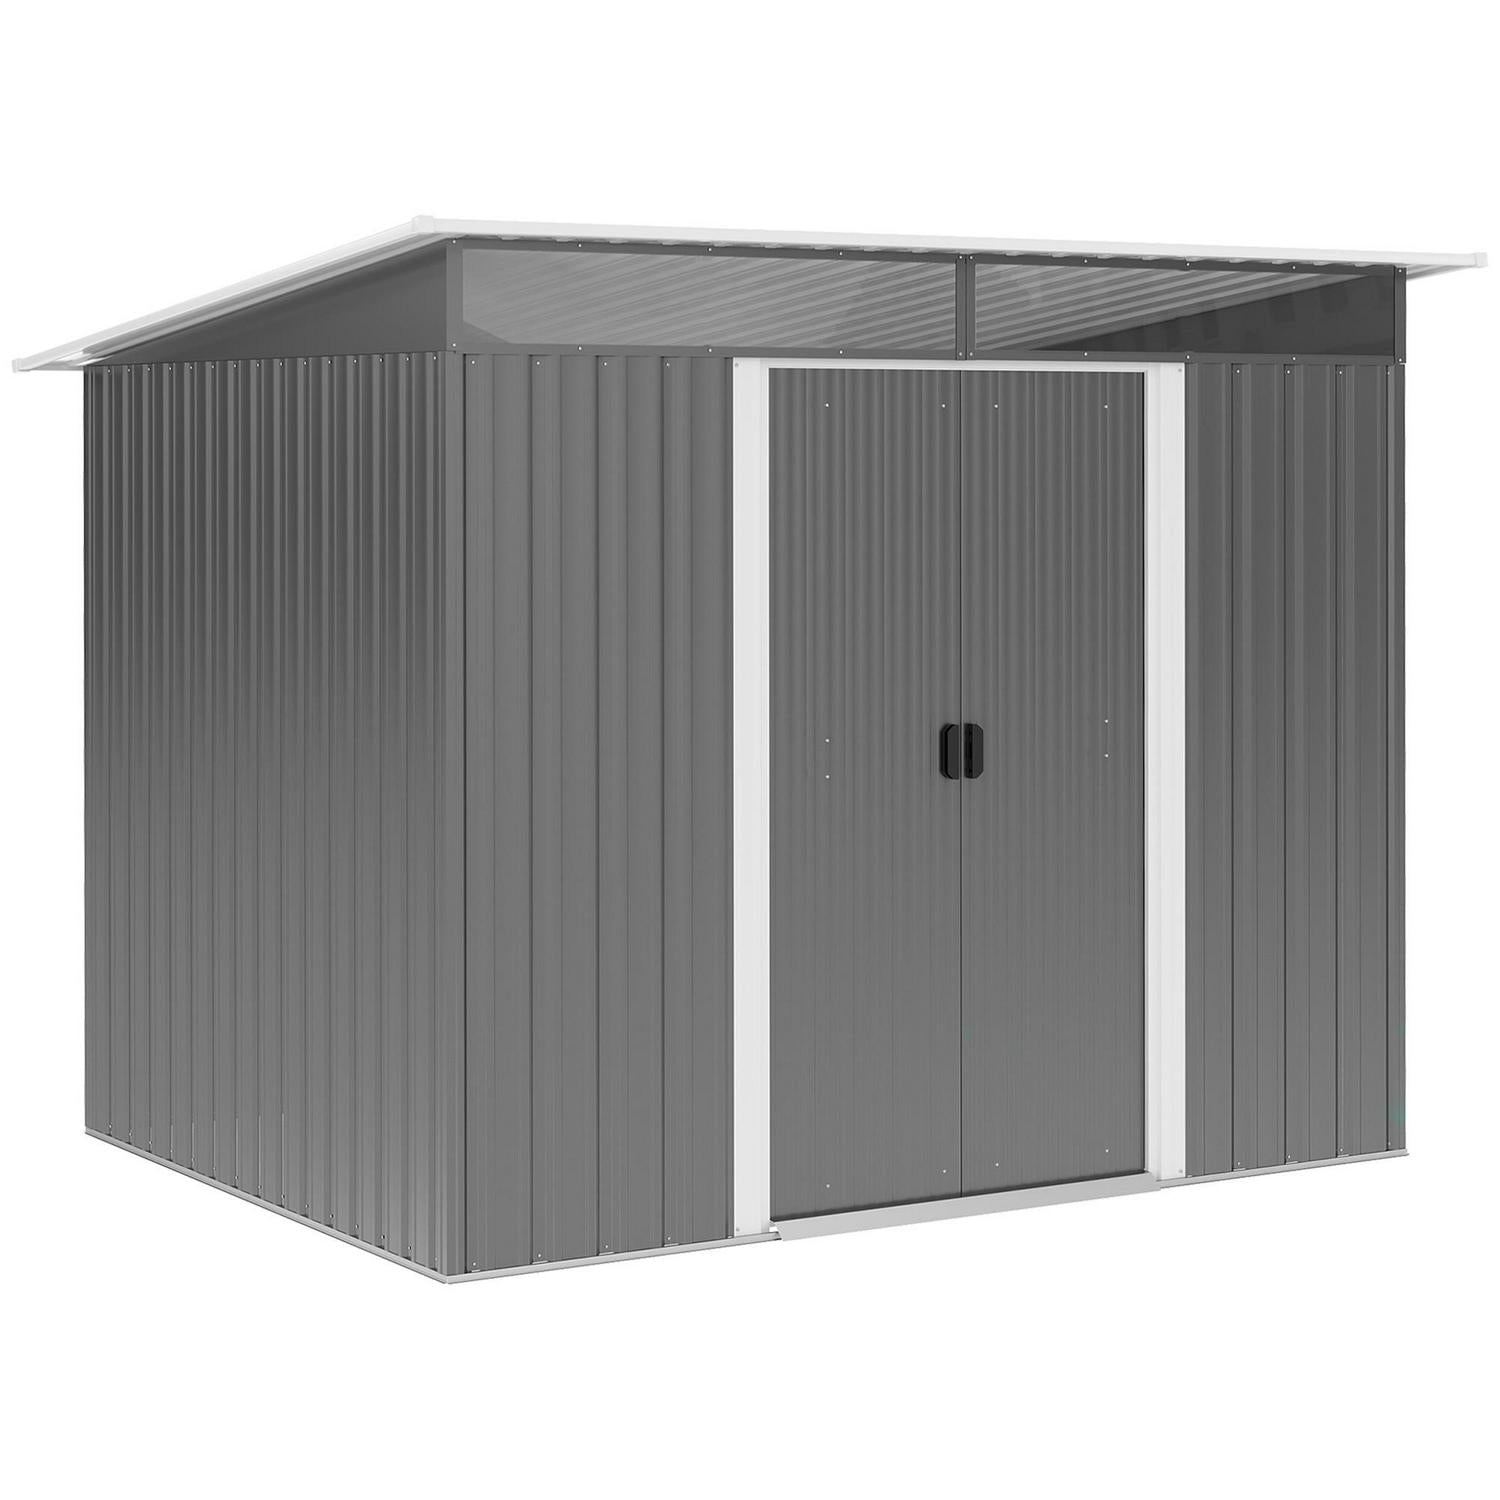 Garden Metal Storage Shed House Hut Gardening Tool W/ Tilted Roof And Ventilation 9 X 6ft, Grey